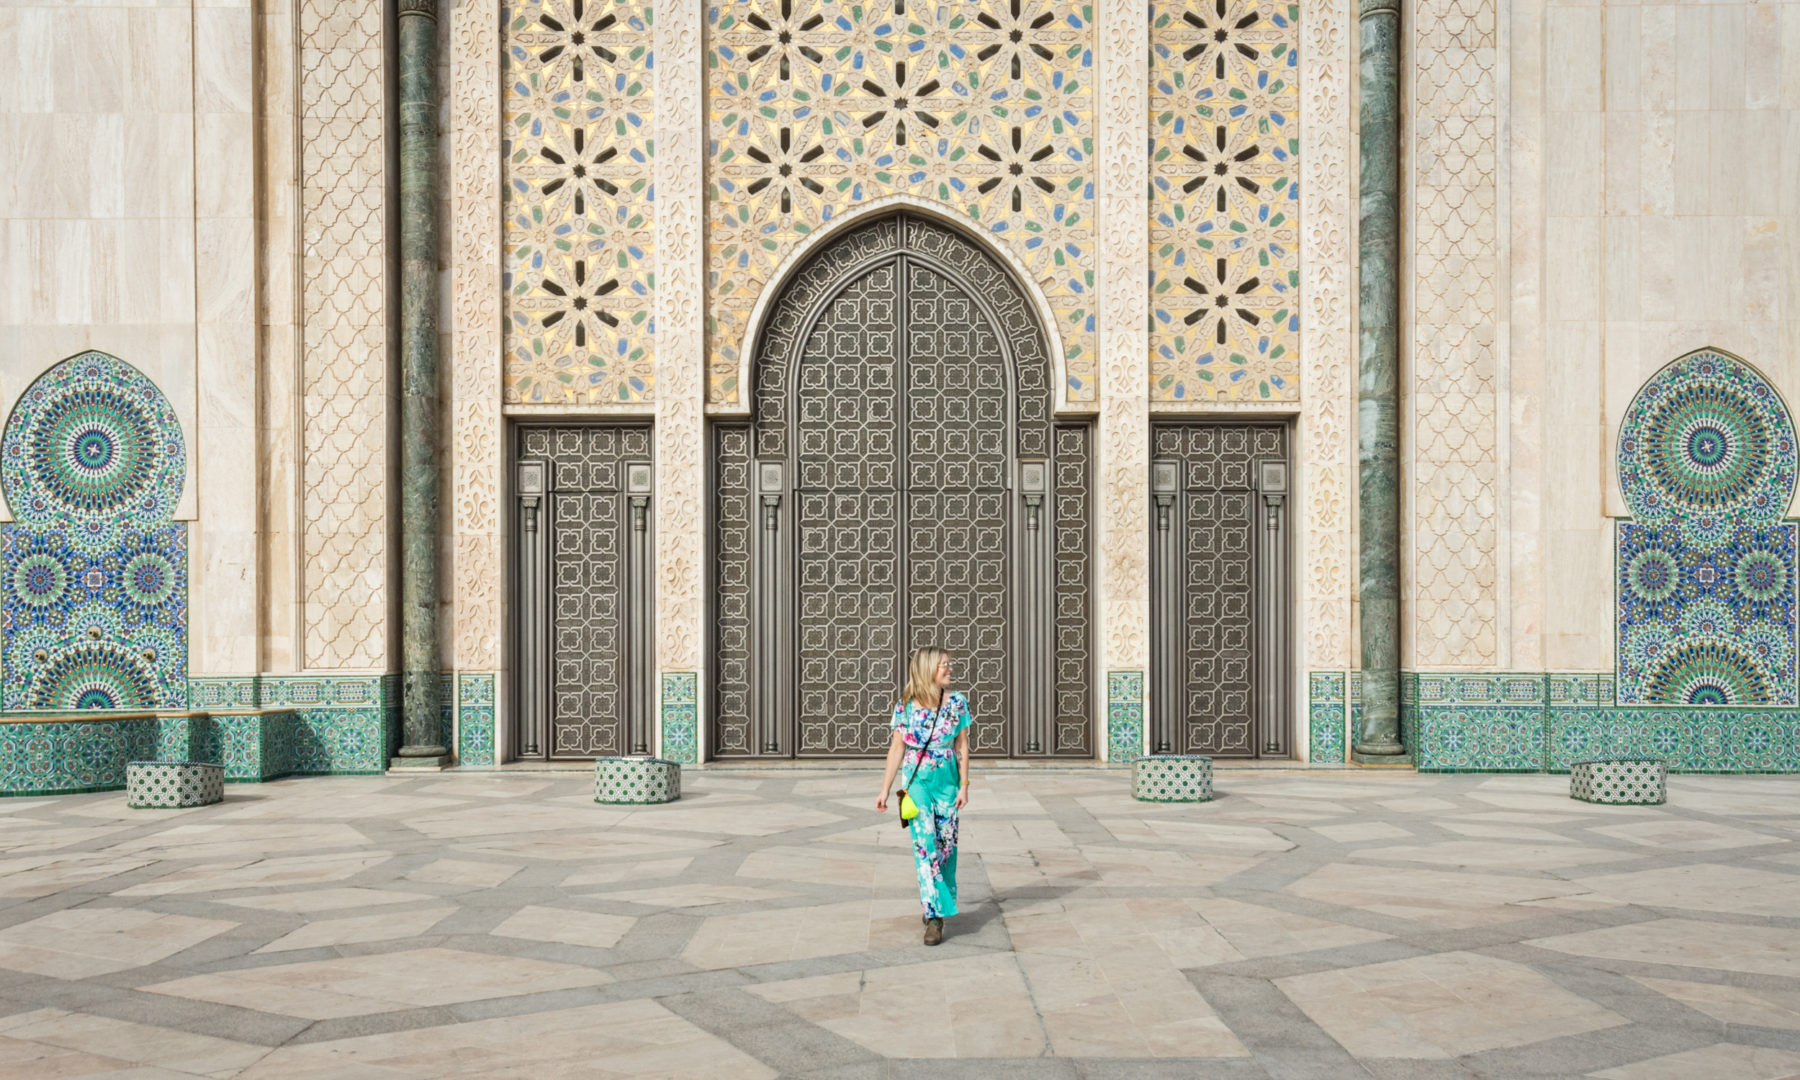 Tips for Visiting Morocco by Wandering Wheatleys